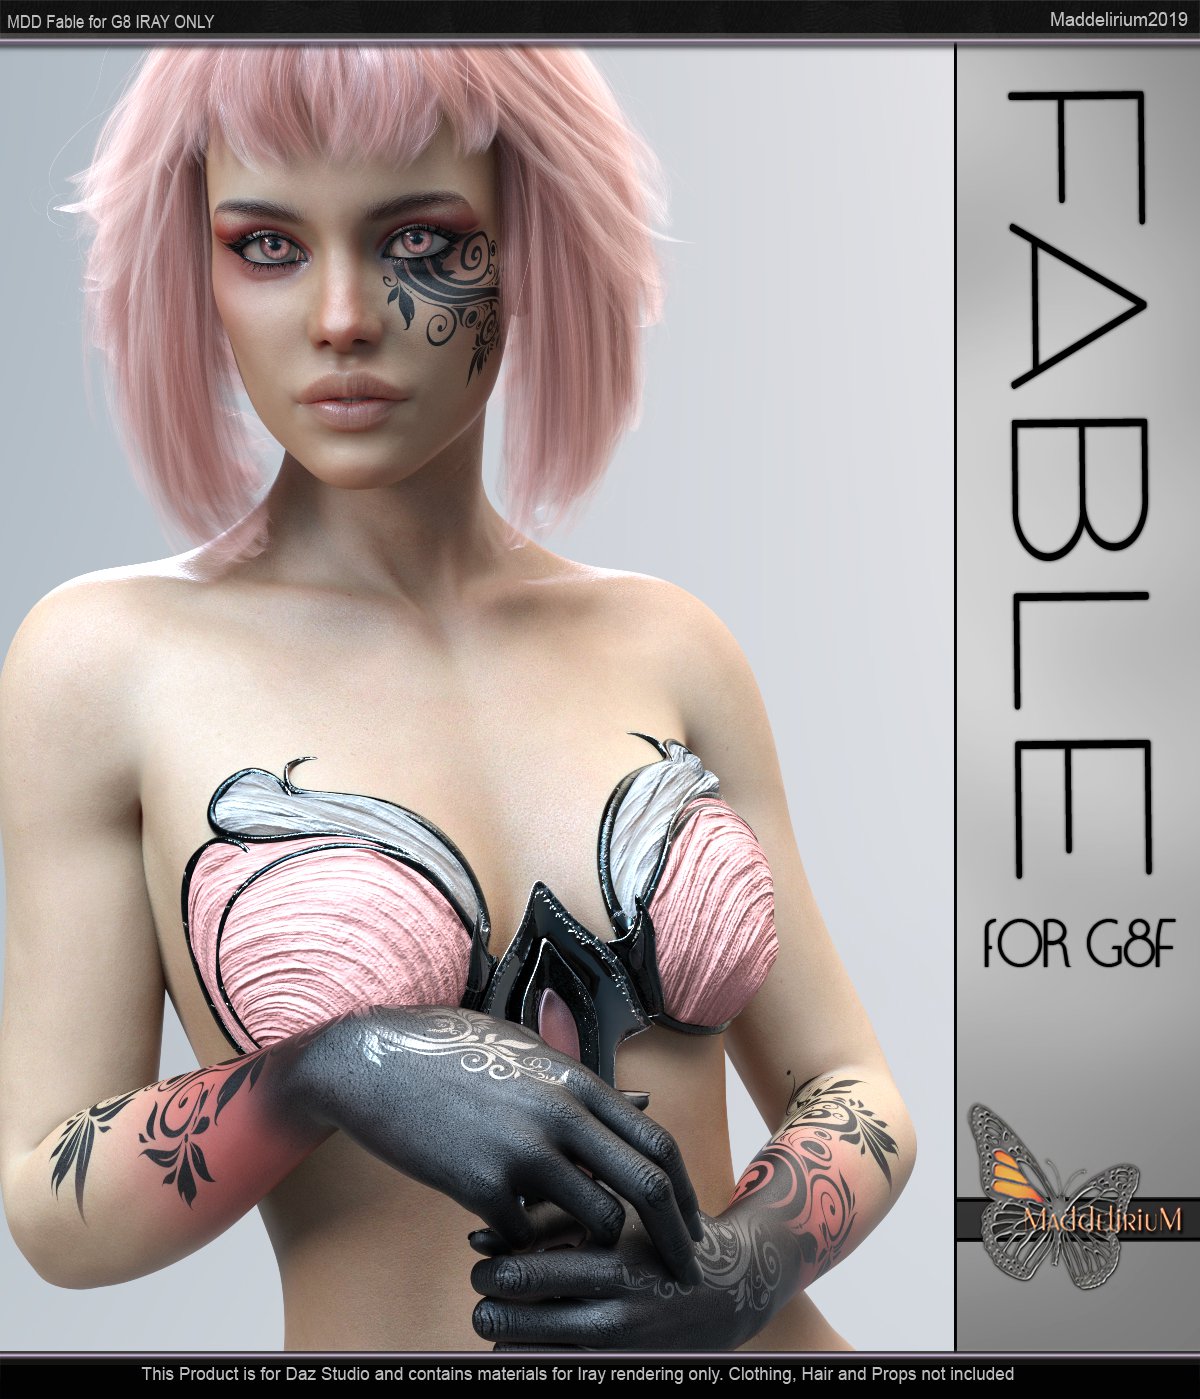 MDD Fable for G8F – IRAY ONLY_DAZ3DDL